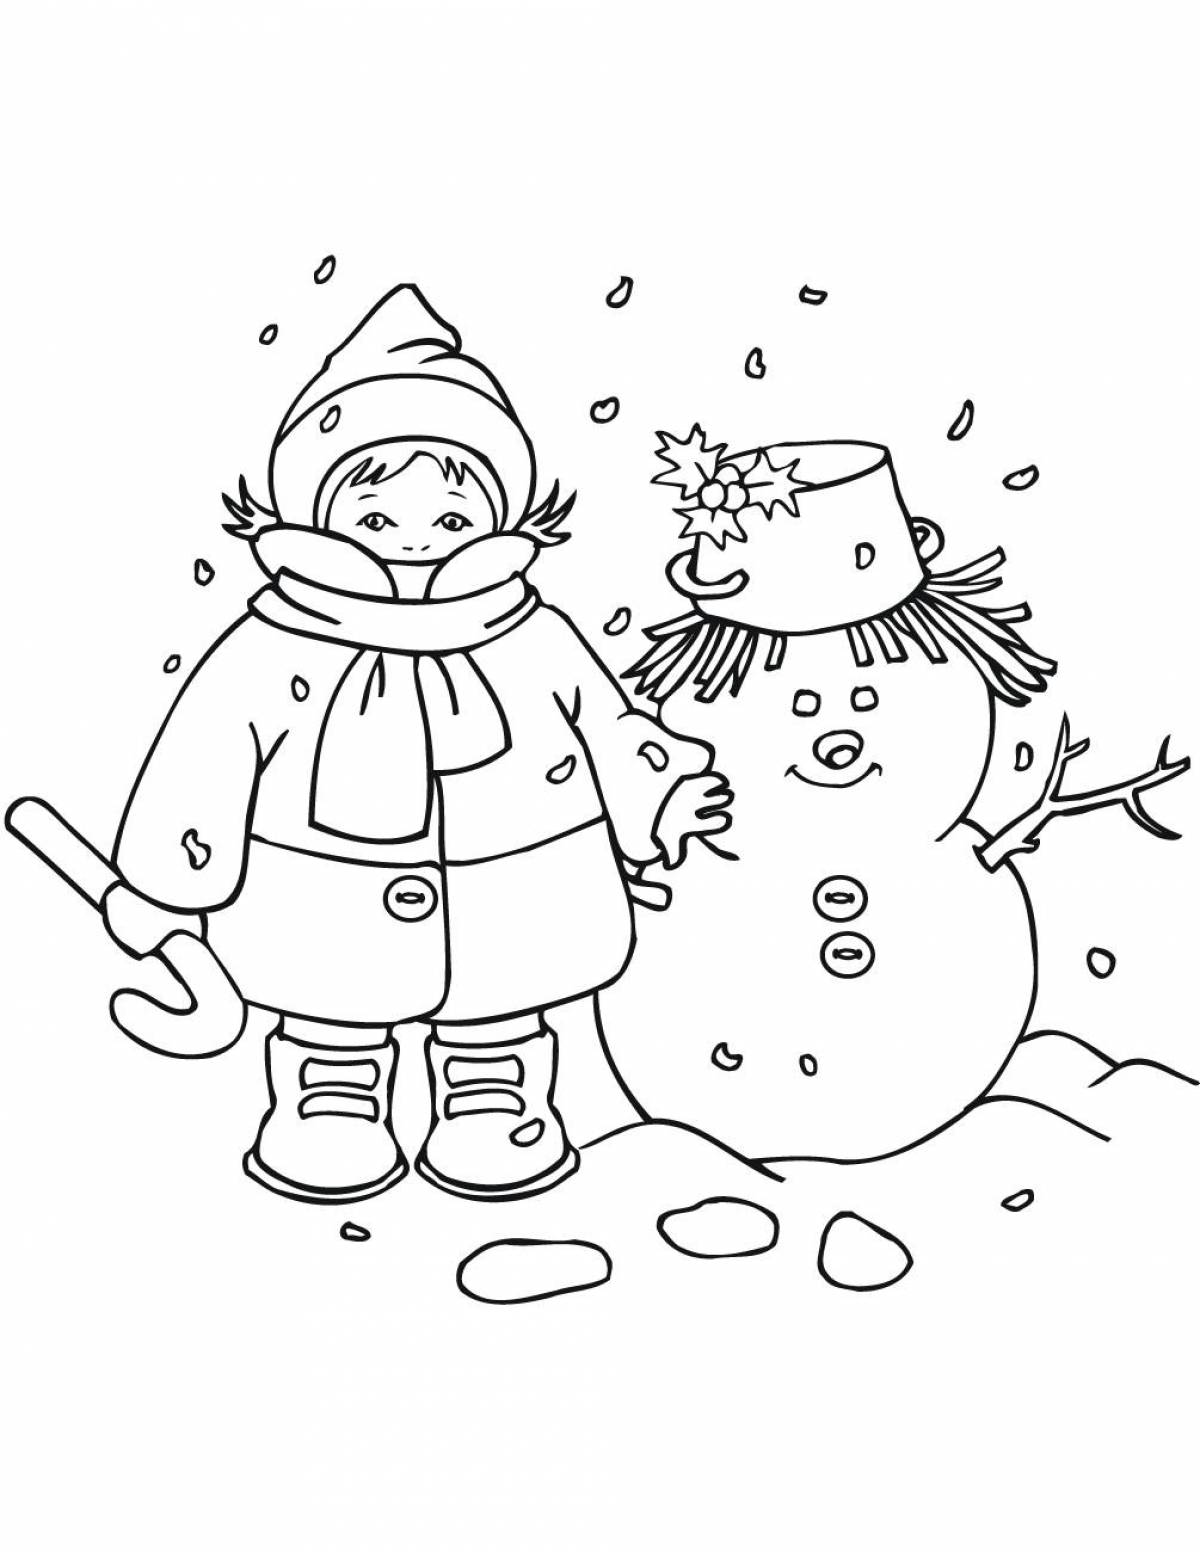 Playtime winter coloring book for kids